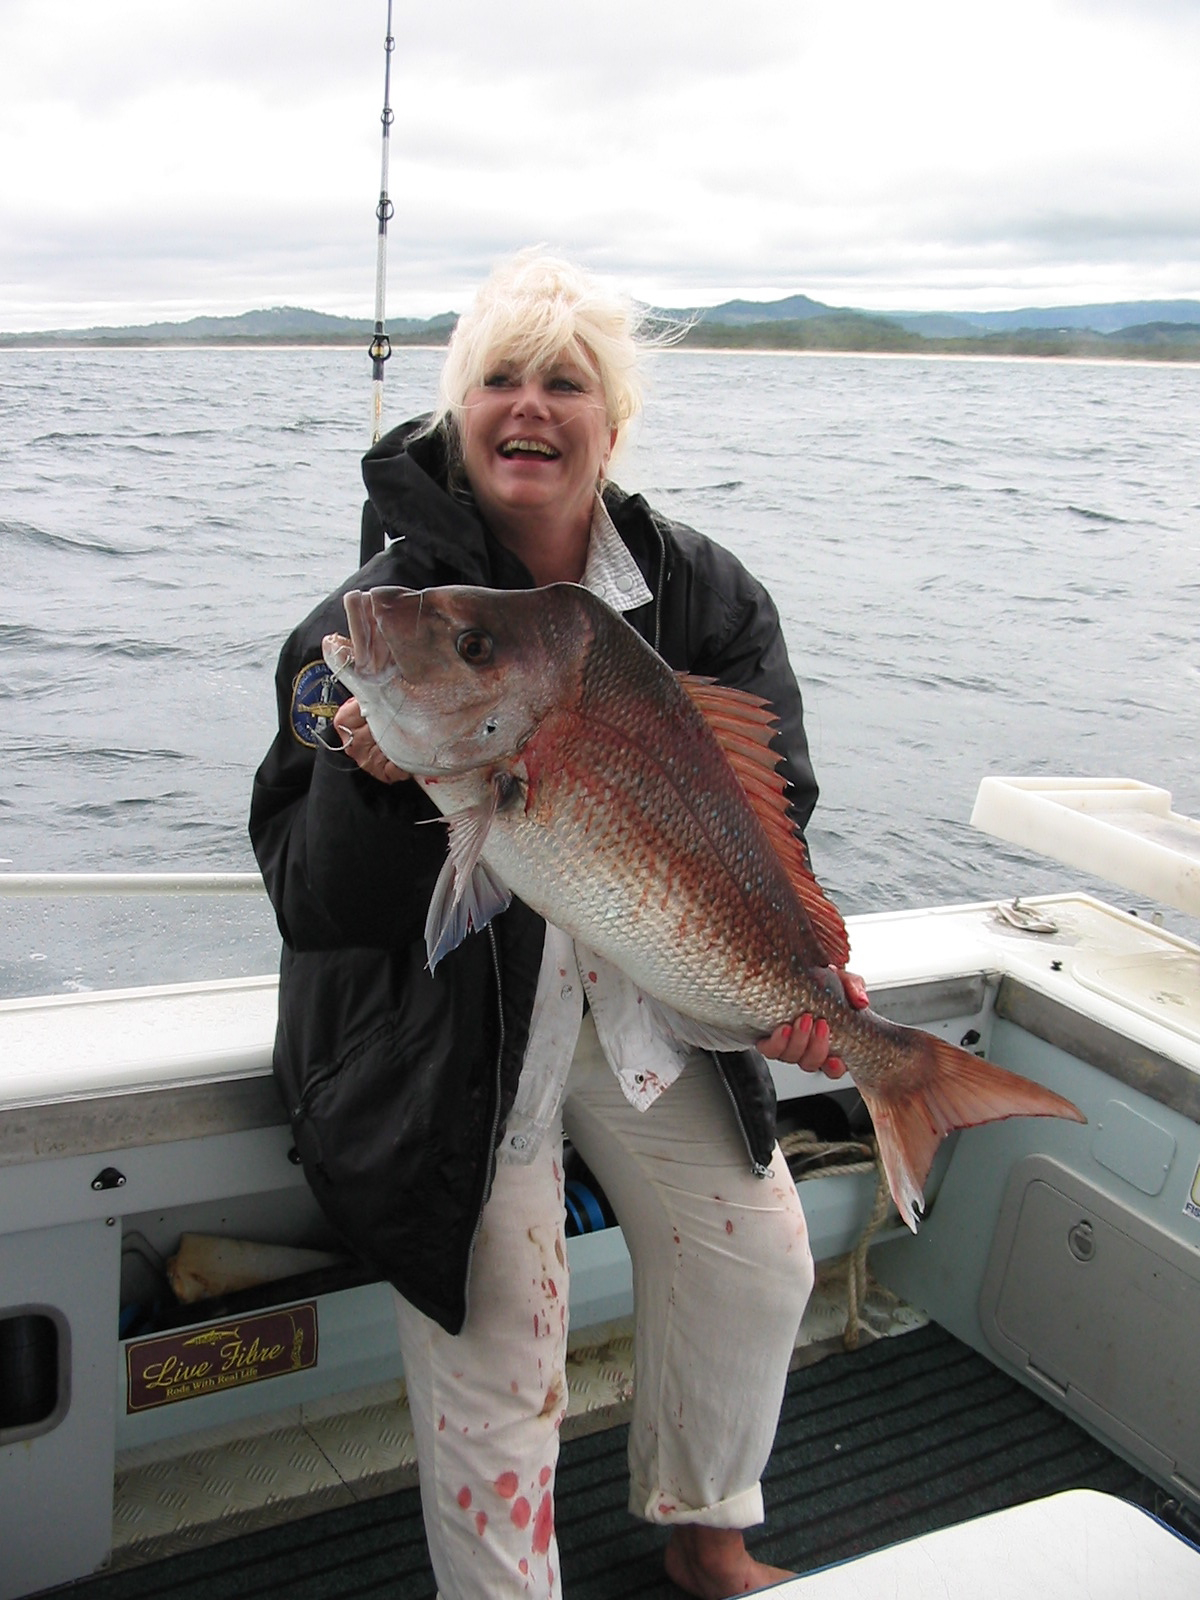  John “Stinker” Clarke says snapper is our fishing fave….